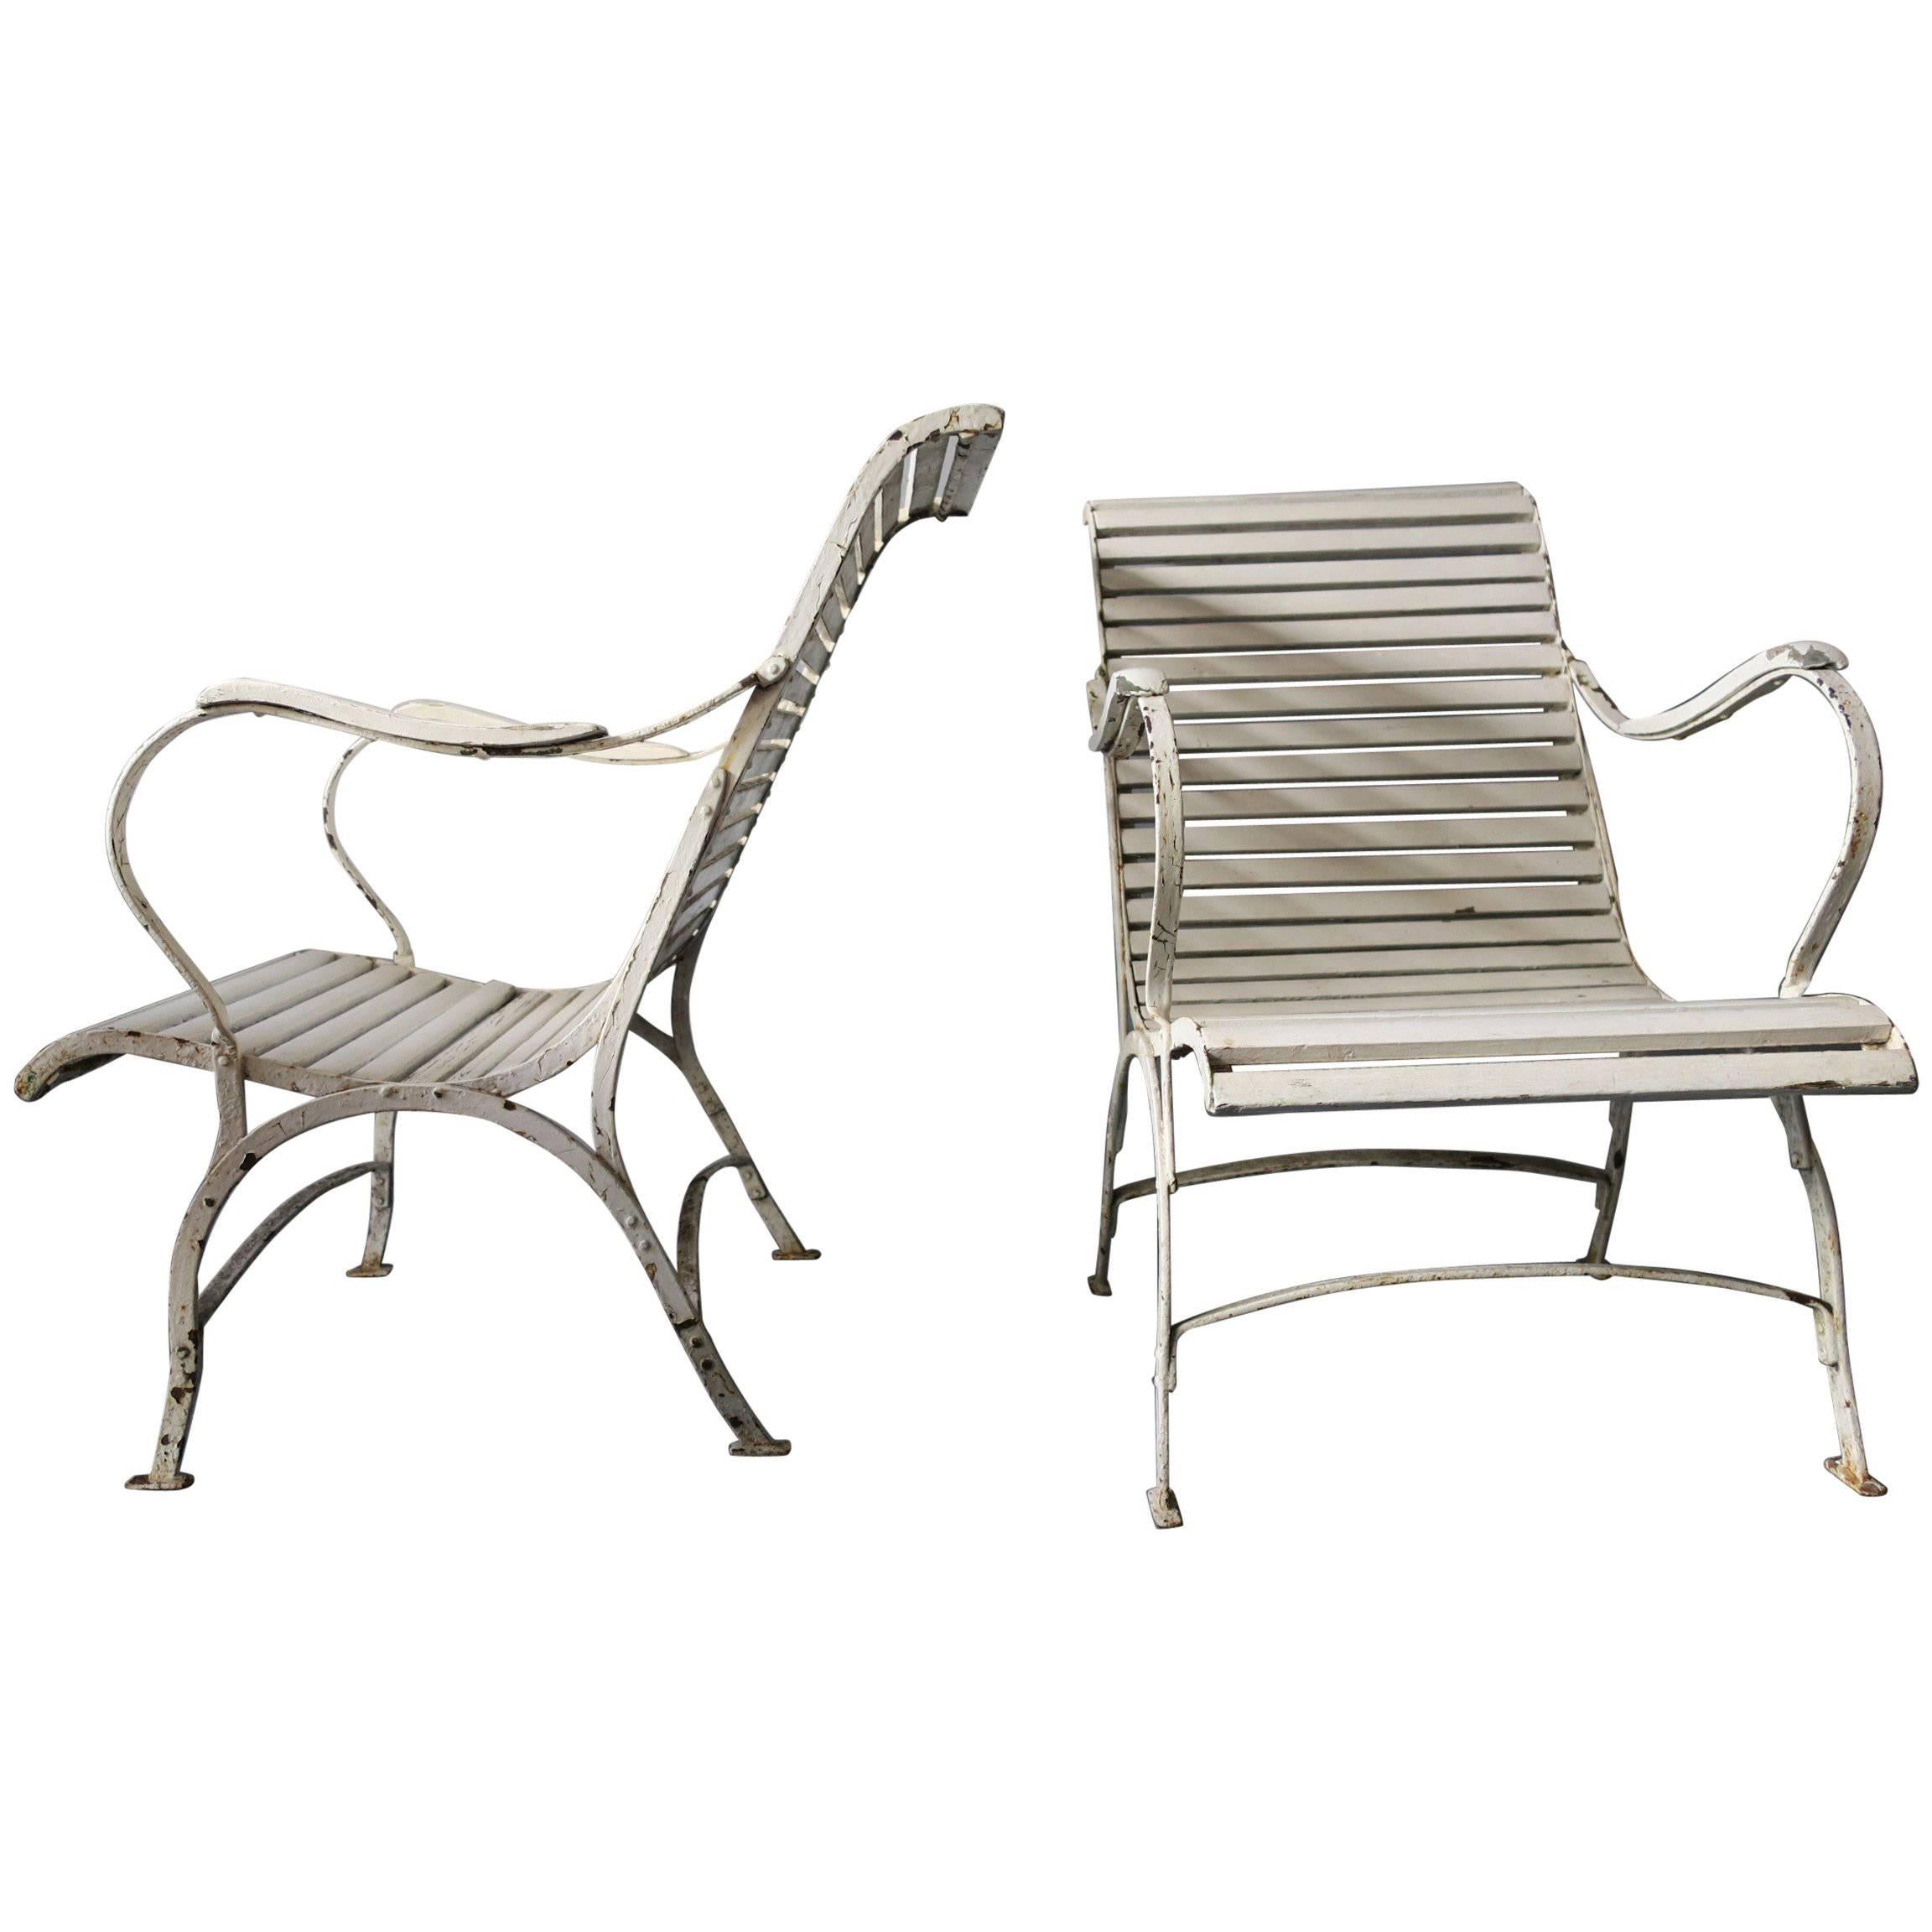 Pair of Painted Iron Garden or Patio Lounge Chairs, Early 20th Century